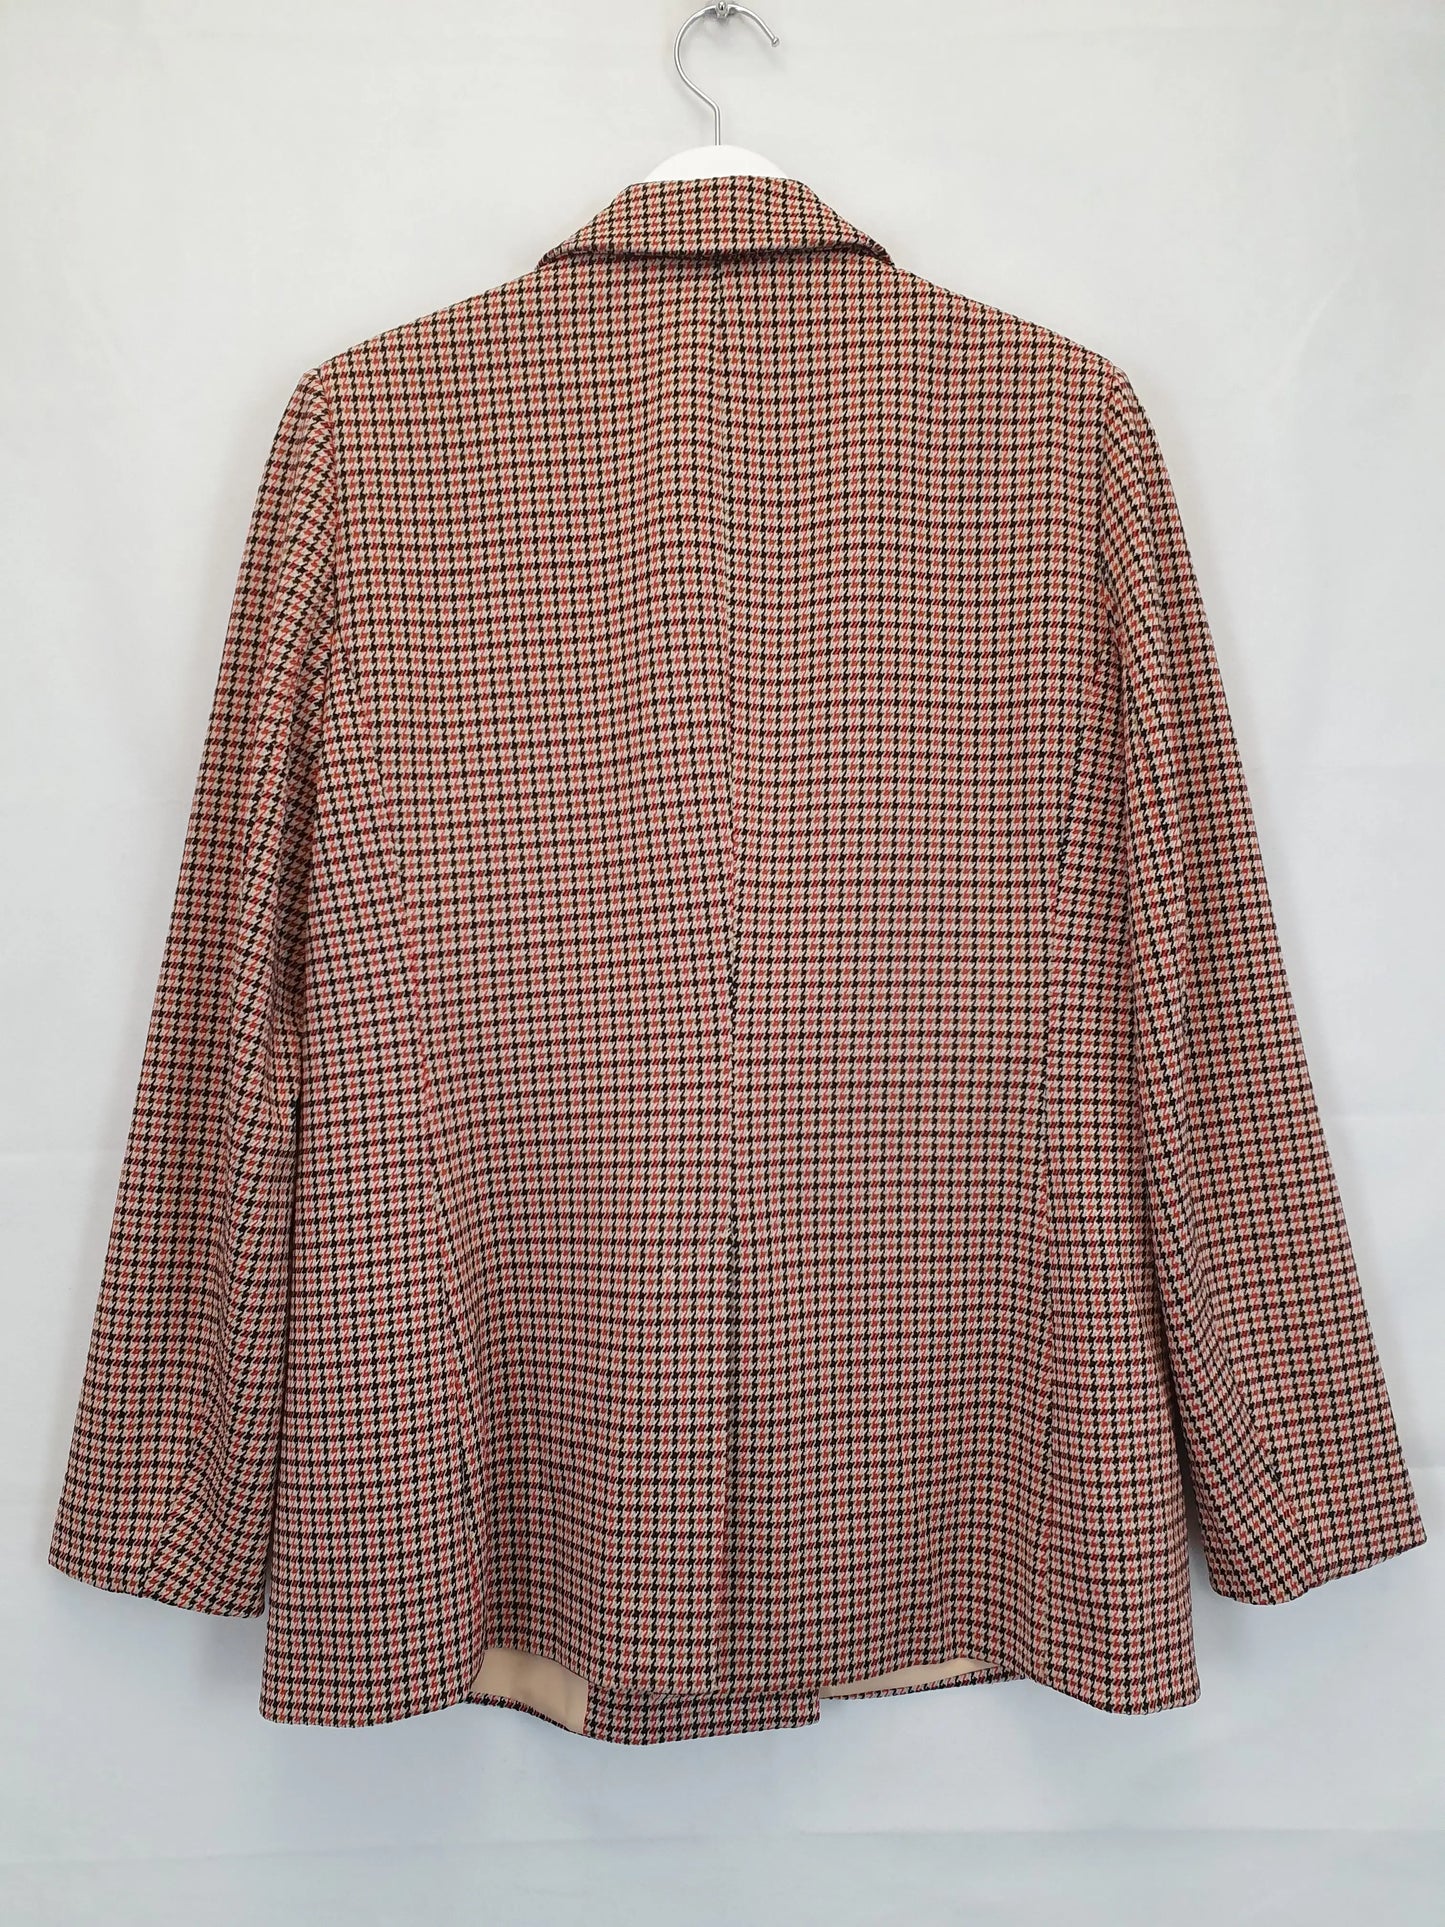 Sussan Classic Houndstooth Tailored Office Essential Jacket Size M by SwapUp-Online Second Hand Store-Online Thrift Store